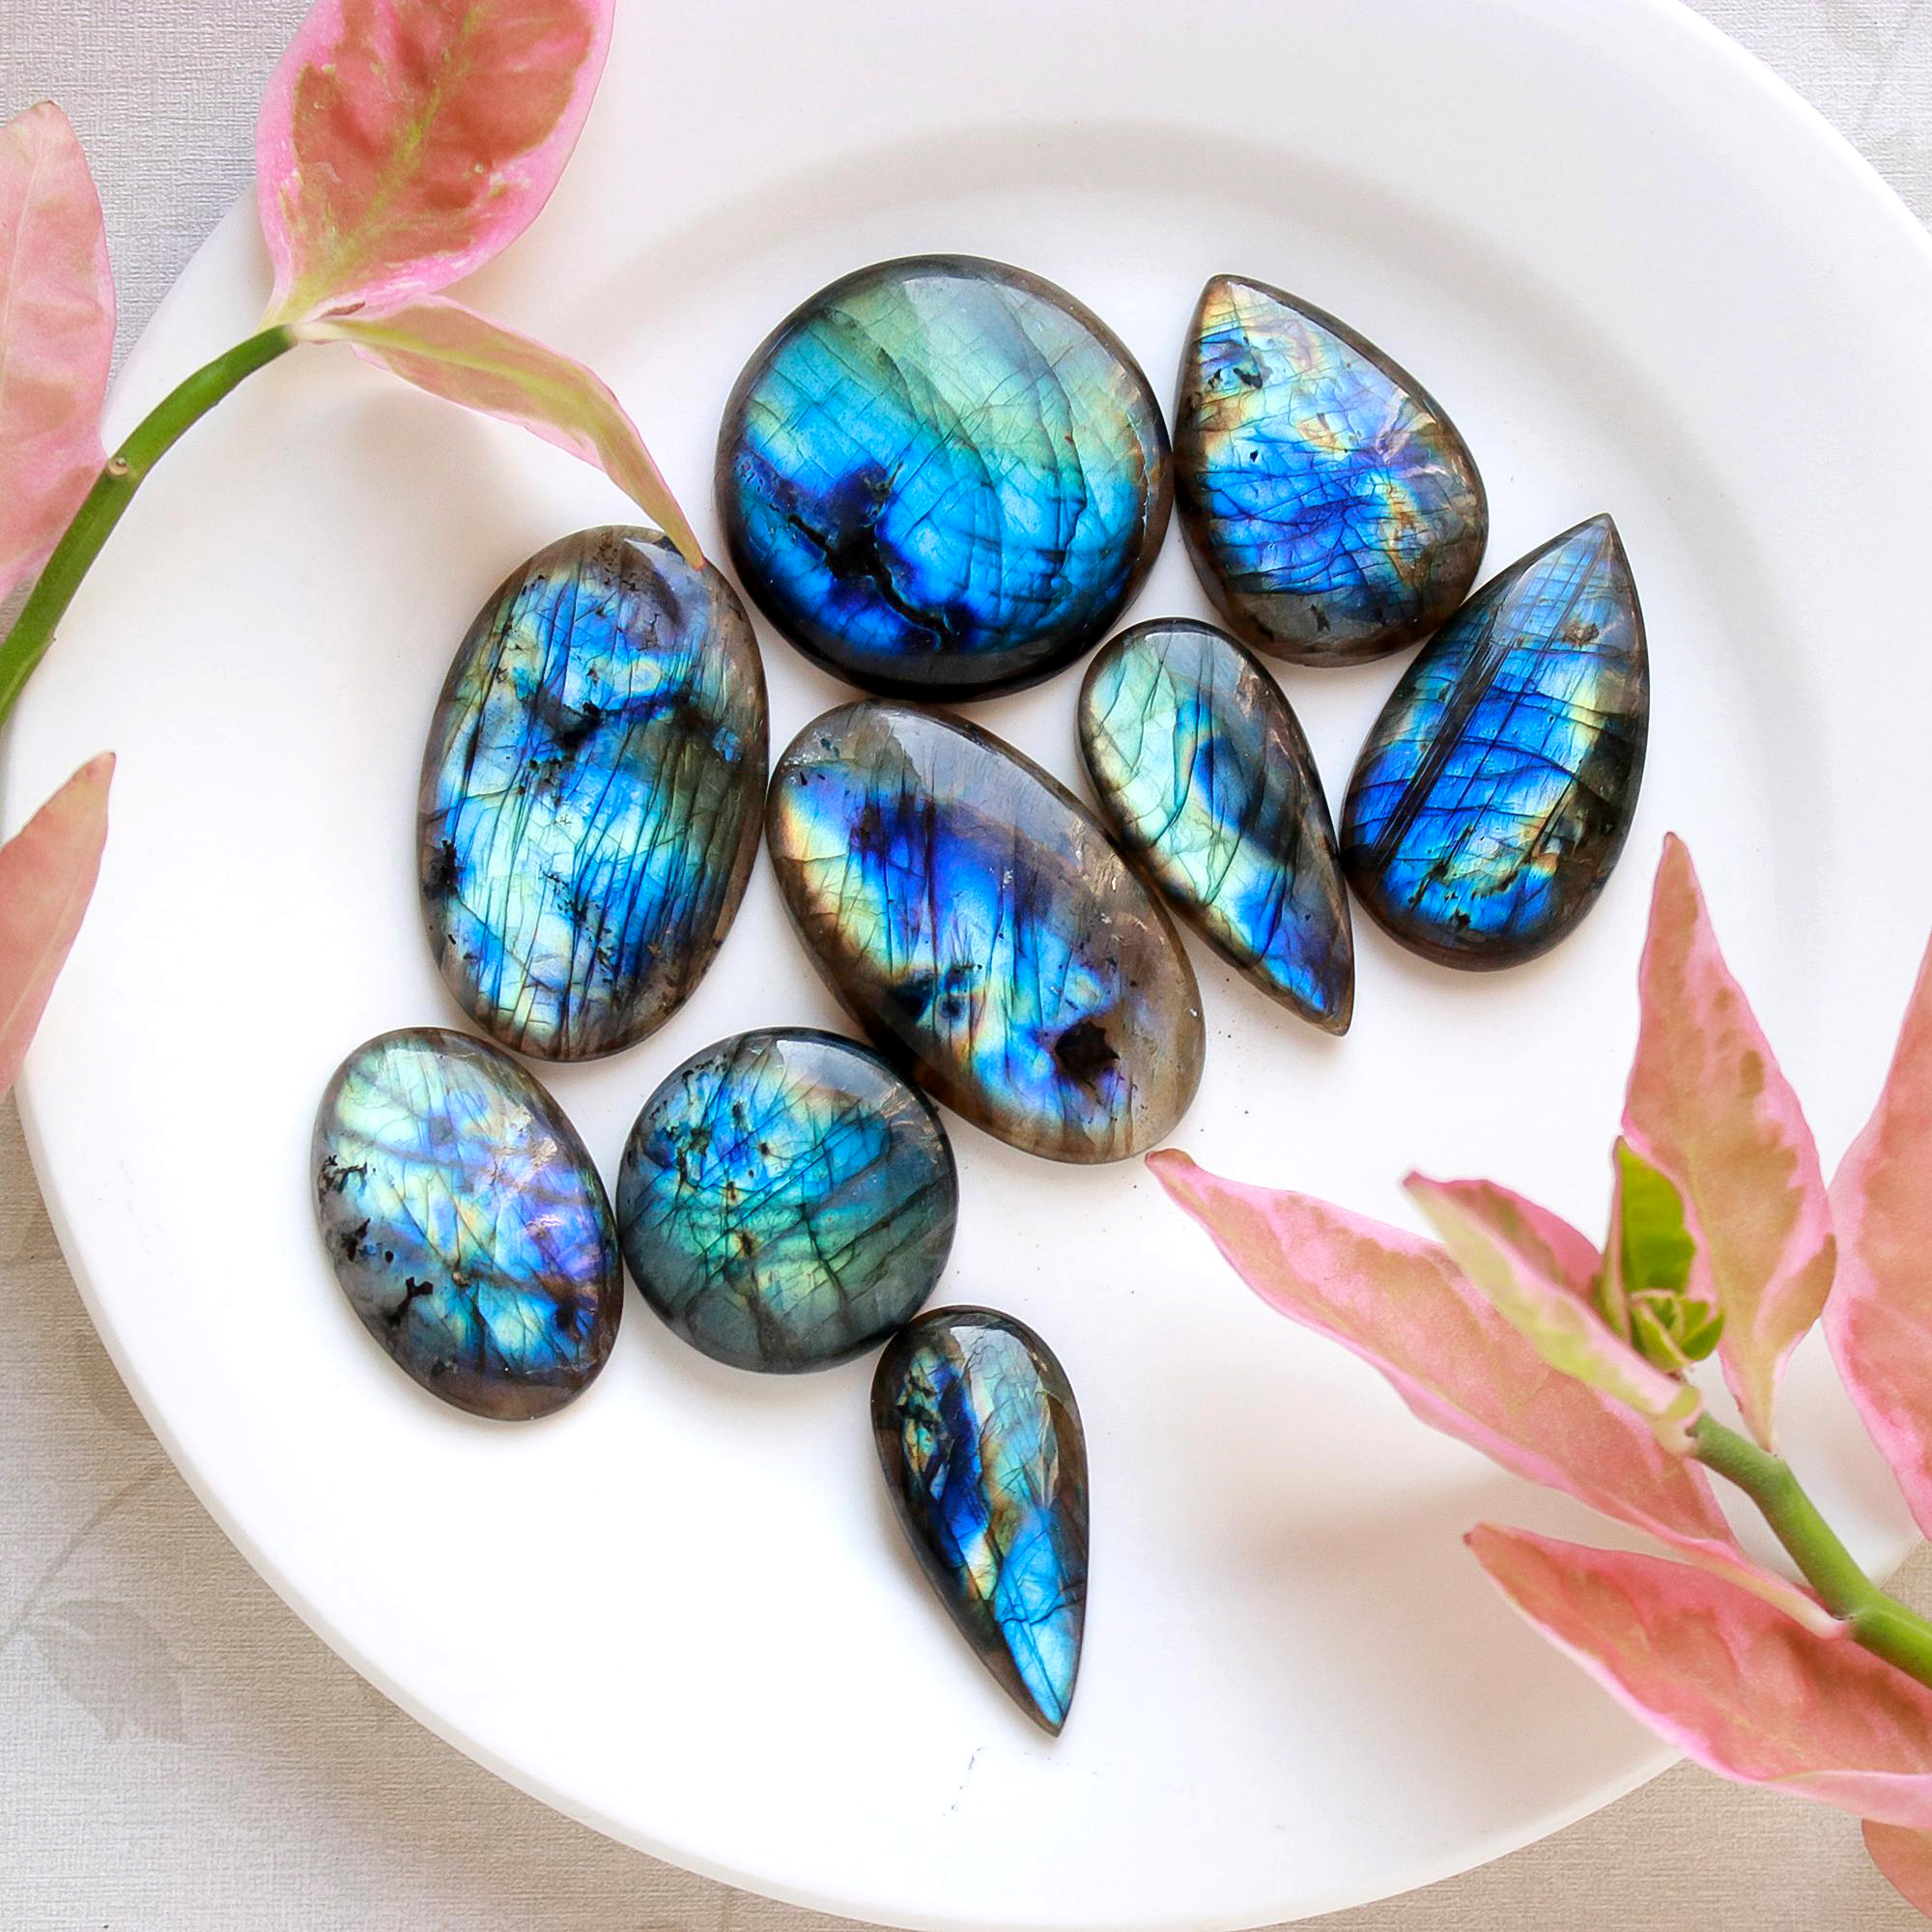 9 Pcs.563 Cts Natural labradorite Cabochon Loose Gemstone For Jewelry Wholesale Lot Size 47x30 37x26mm#1117